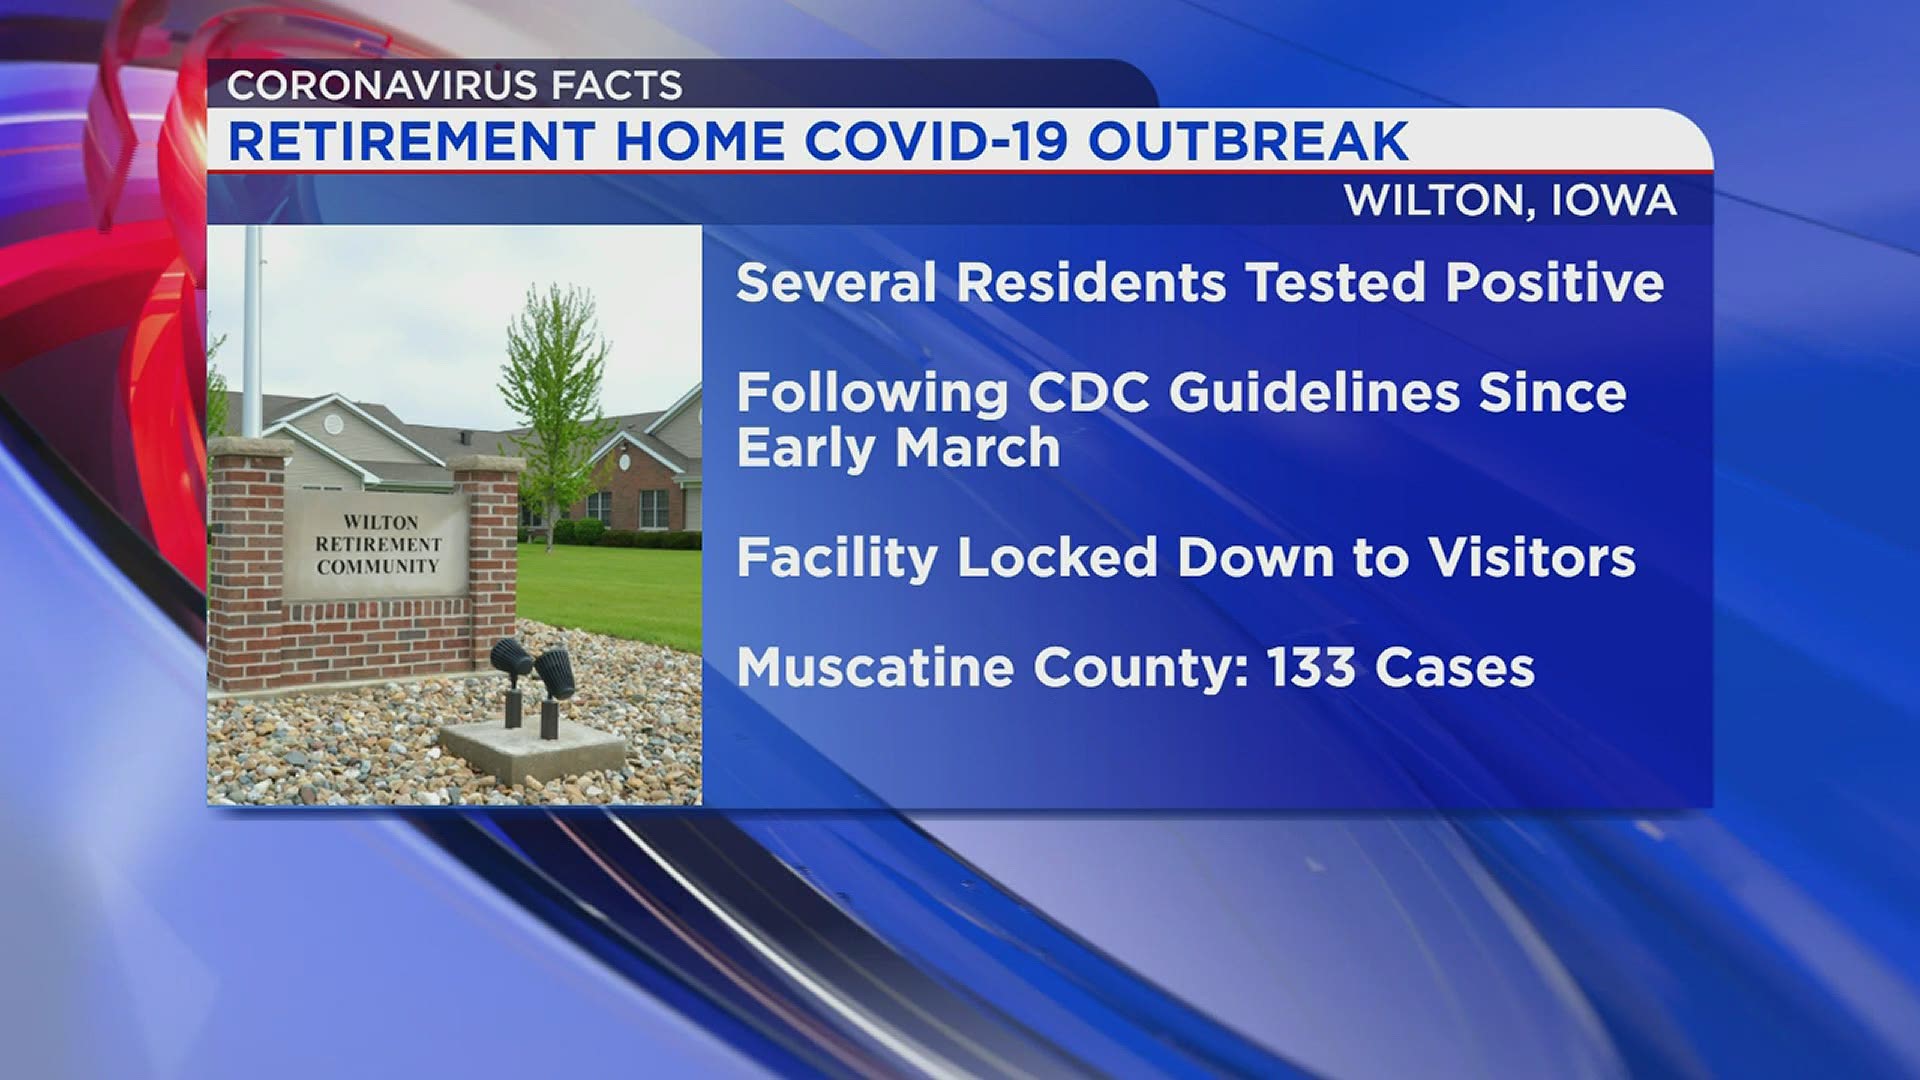 Several residents have tested positive.